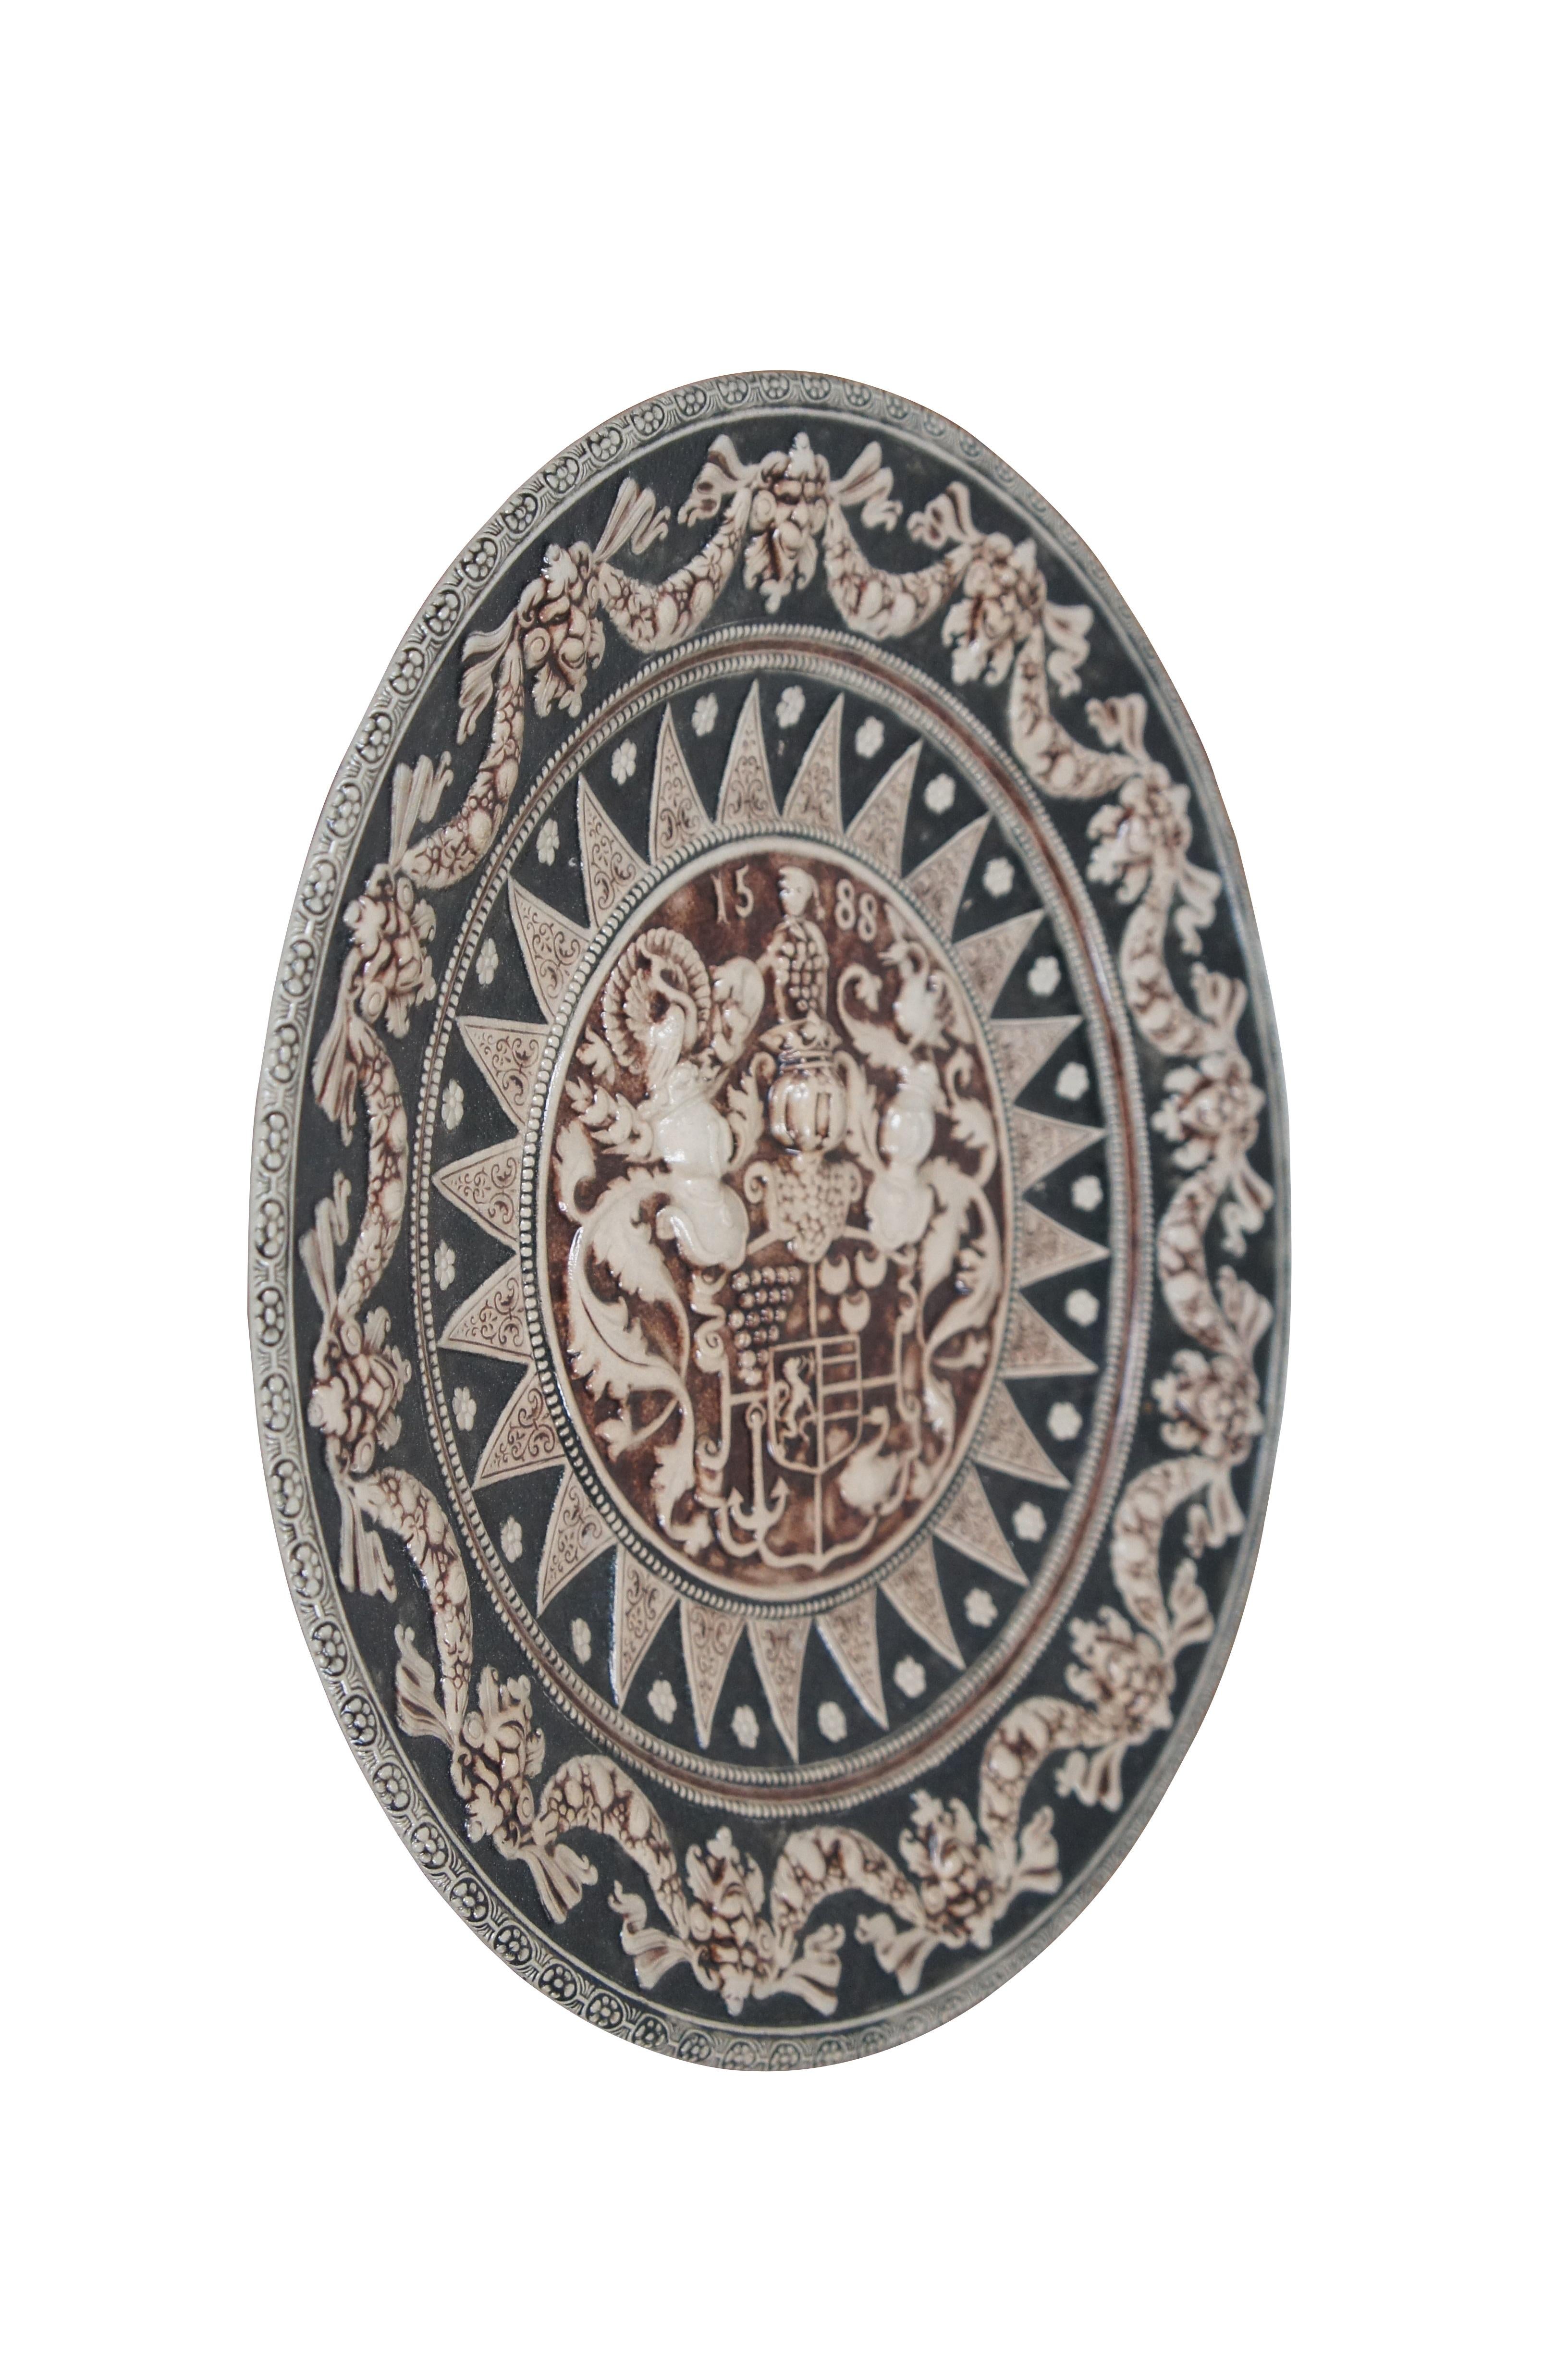 Mid to late 20th century German Westerwald salt glaze stoneware wall hanging plate / charger accented with deep charcoal and brown glaze, featuring a heraldic design in relief depicting an elaborate coat of arms festooned with plumed helmets,